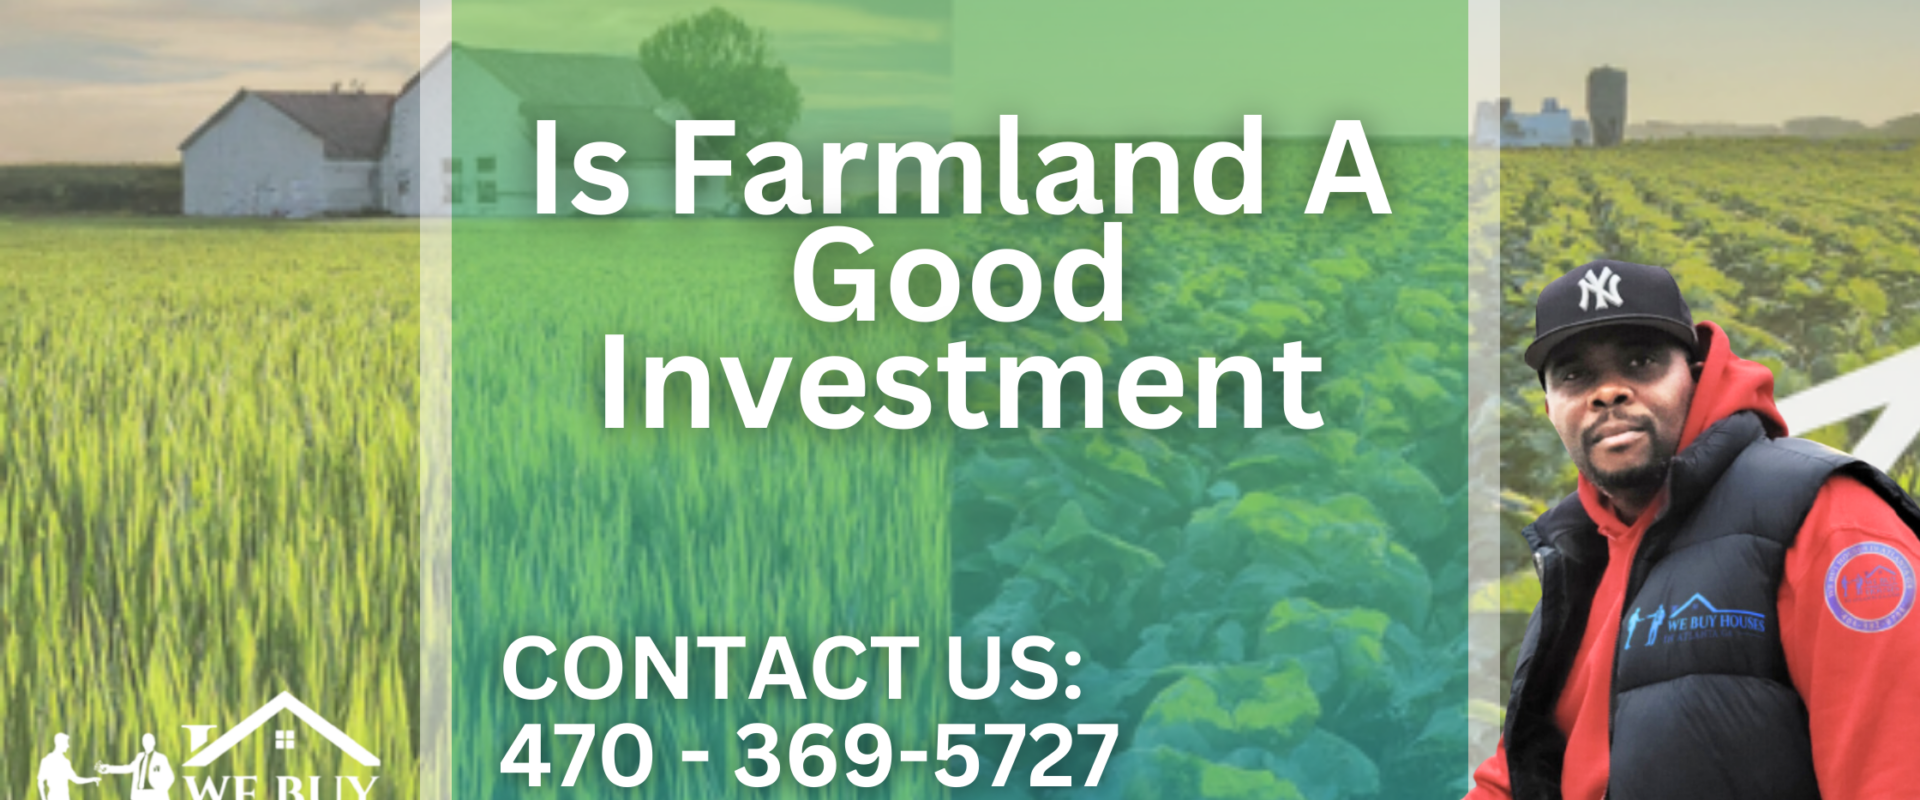 Is Farmland A Good Investment